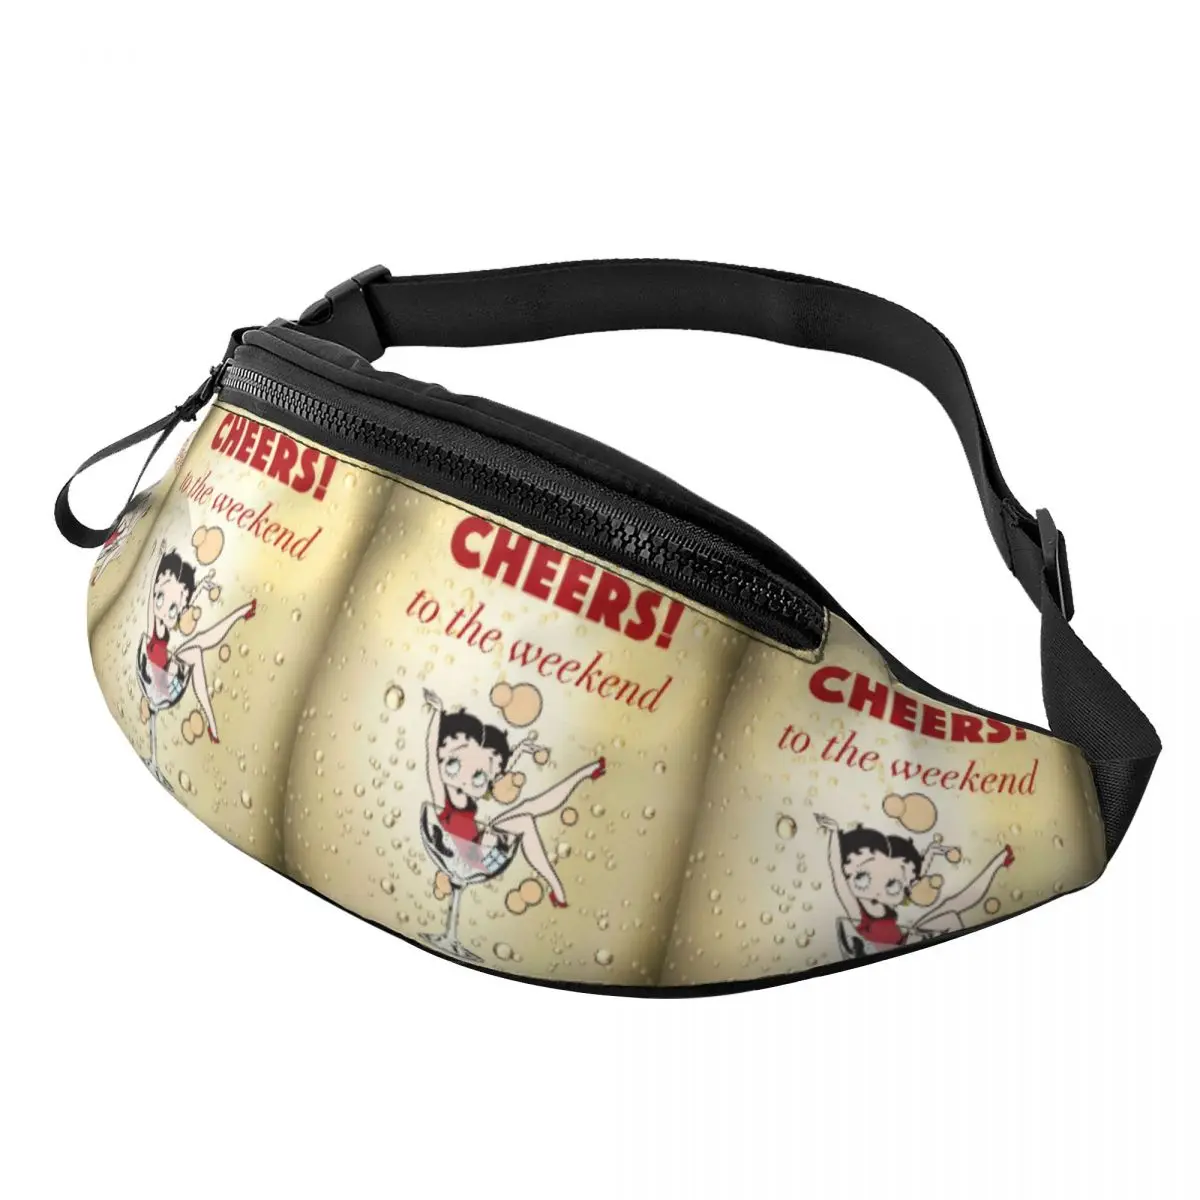 

Casual Funny Bettys Cartoon Boop Cheers To The Weekend Fanny Pack Animation Crossbody Waist Bag for Traveling Phone Money Pouch